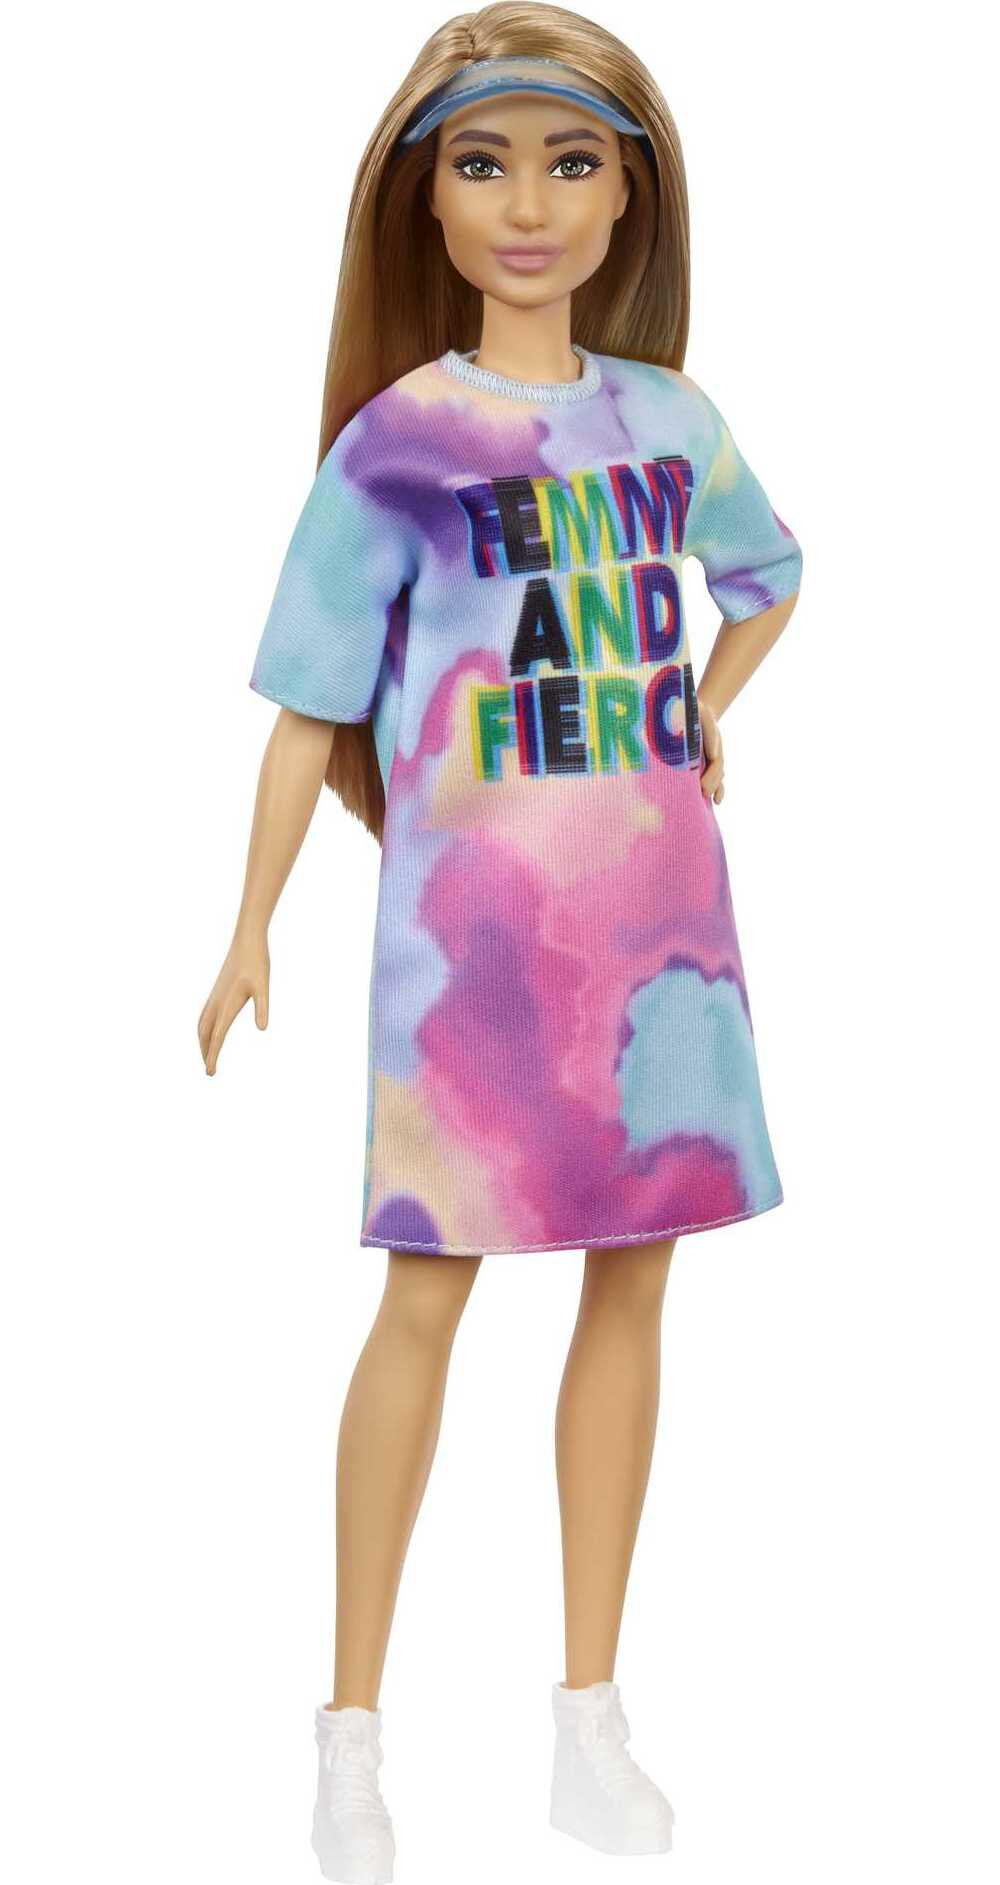 Barbie Fashionistas Doll, Petite, with Light Brown Hair Wearing Tie-Dye T-Shirt Dress, White Shoes & Visor, Toy for Kids 3 to 8 Years Old - image 1 of 7